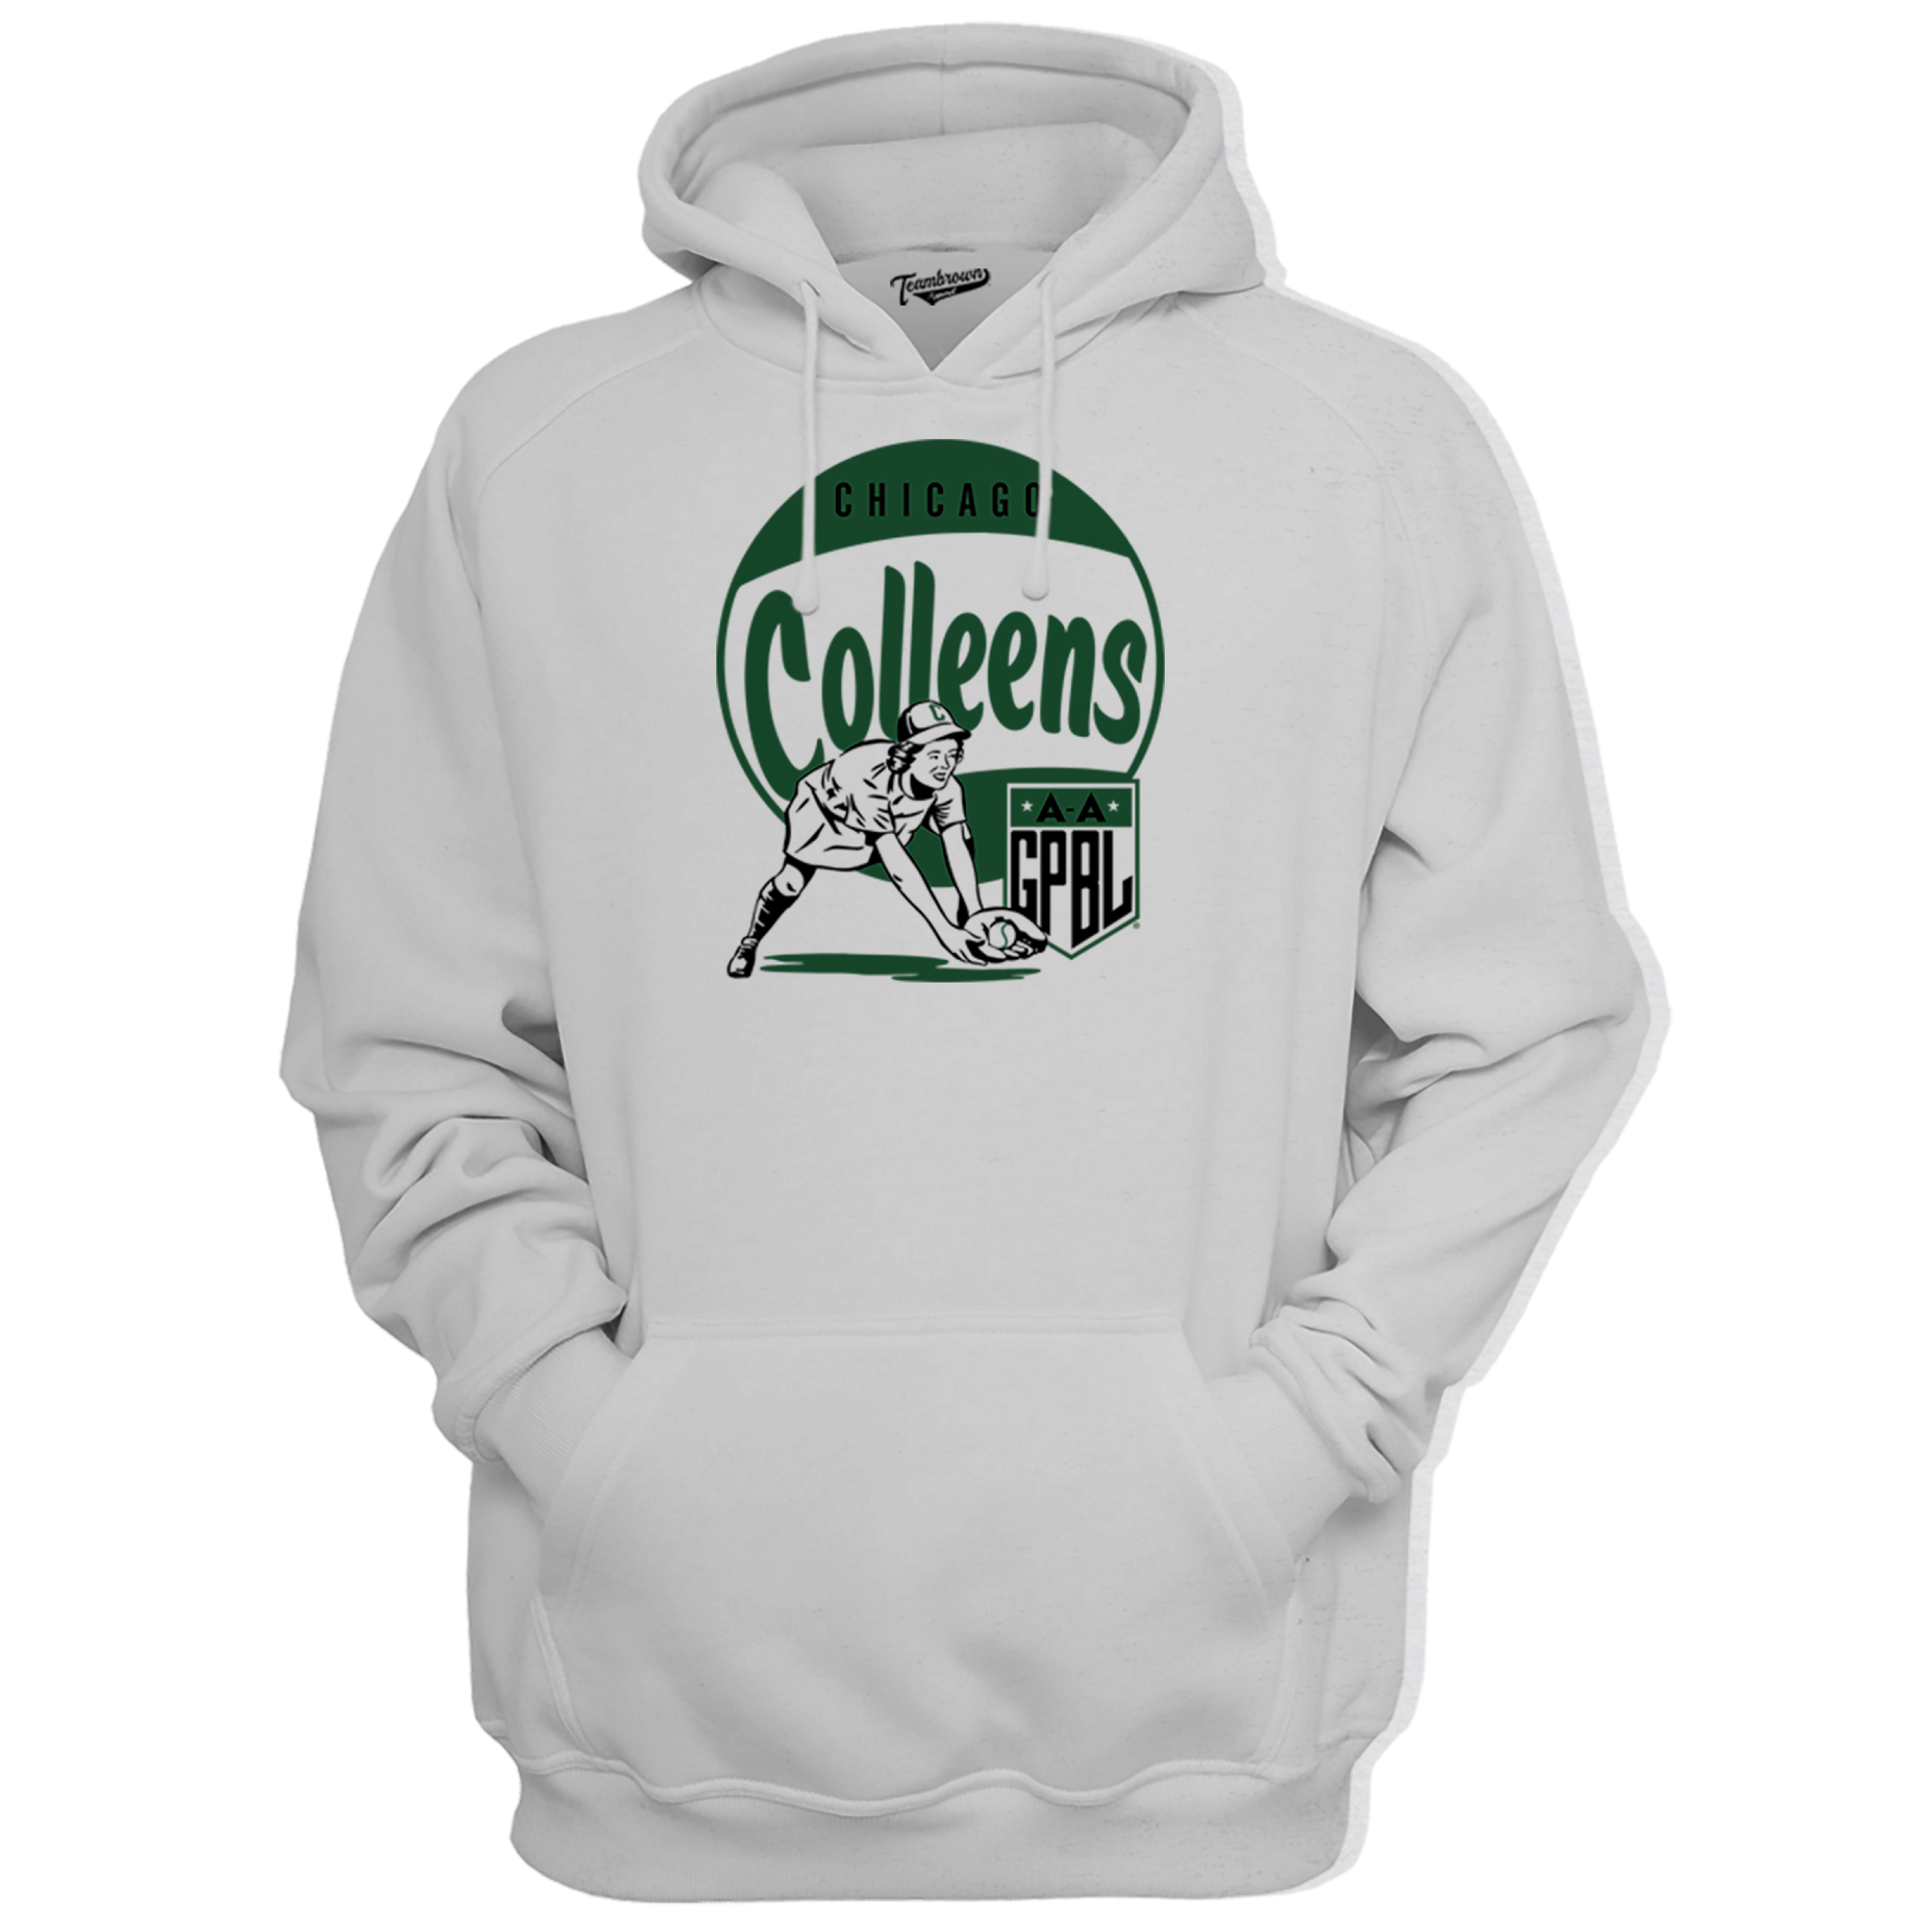 Diamond - Chicago Colleens - Unisex Premium Hoodie | Officially Licensed - AAGPBL